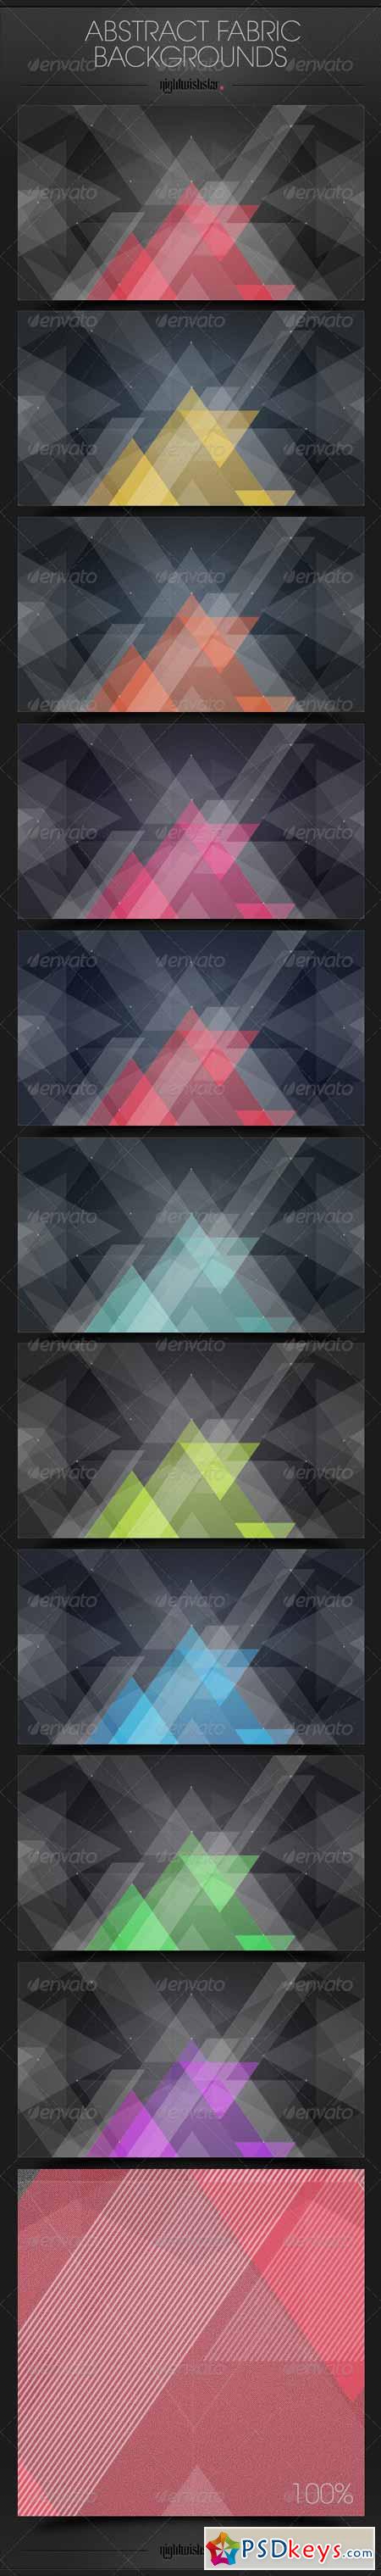 Abstract Fabric Triangles Backgrounds 6510163